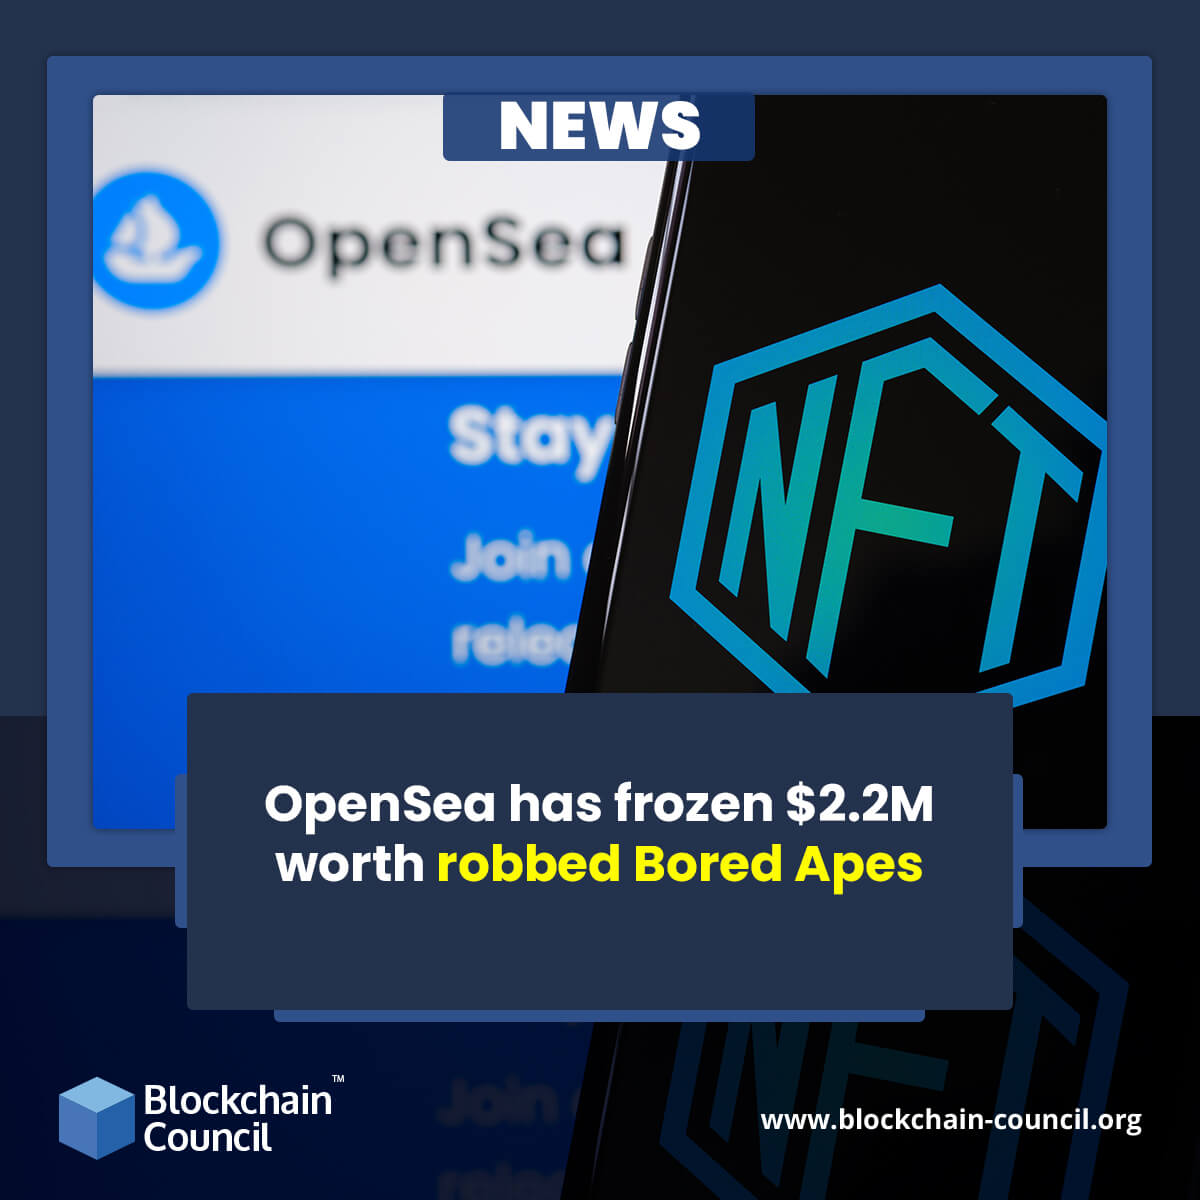 OpenSea has frozen $2.2M worth robbed Bored Apes